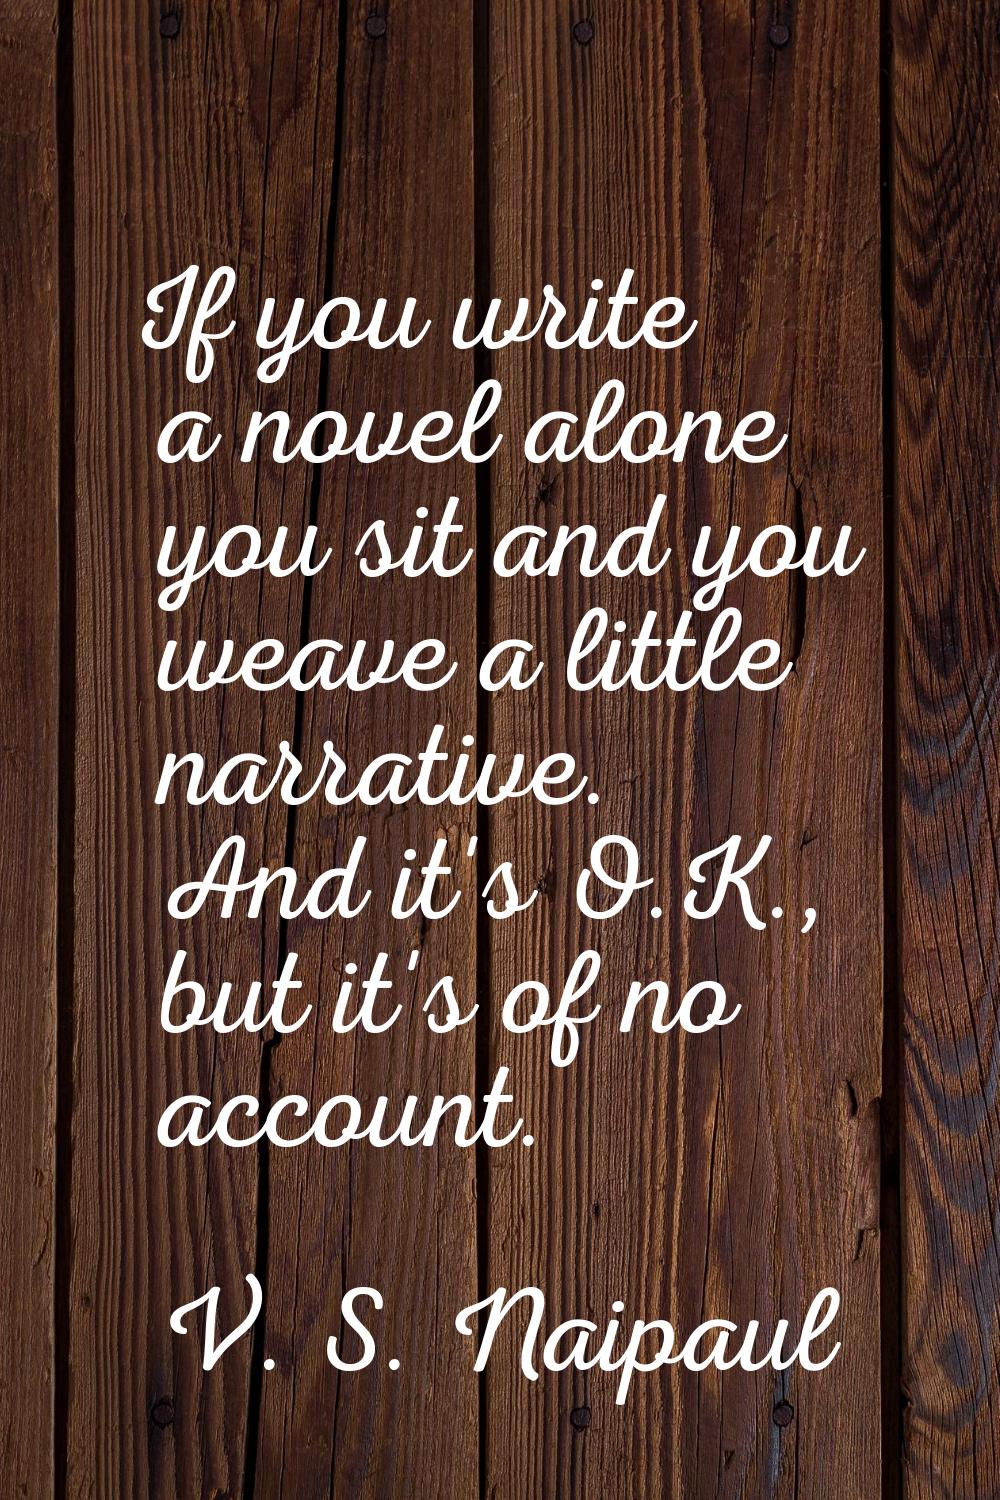 If you write a novel alone you sit and you weave a little narrative. And it's O.K., but it's of no 